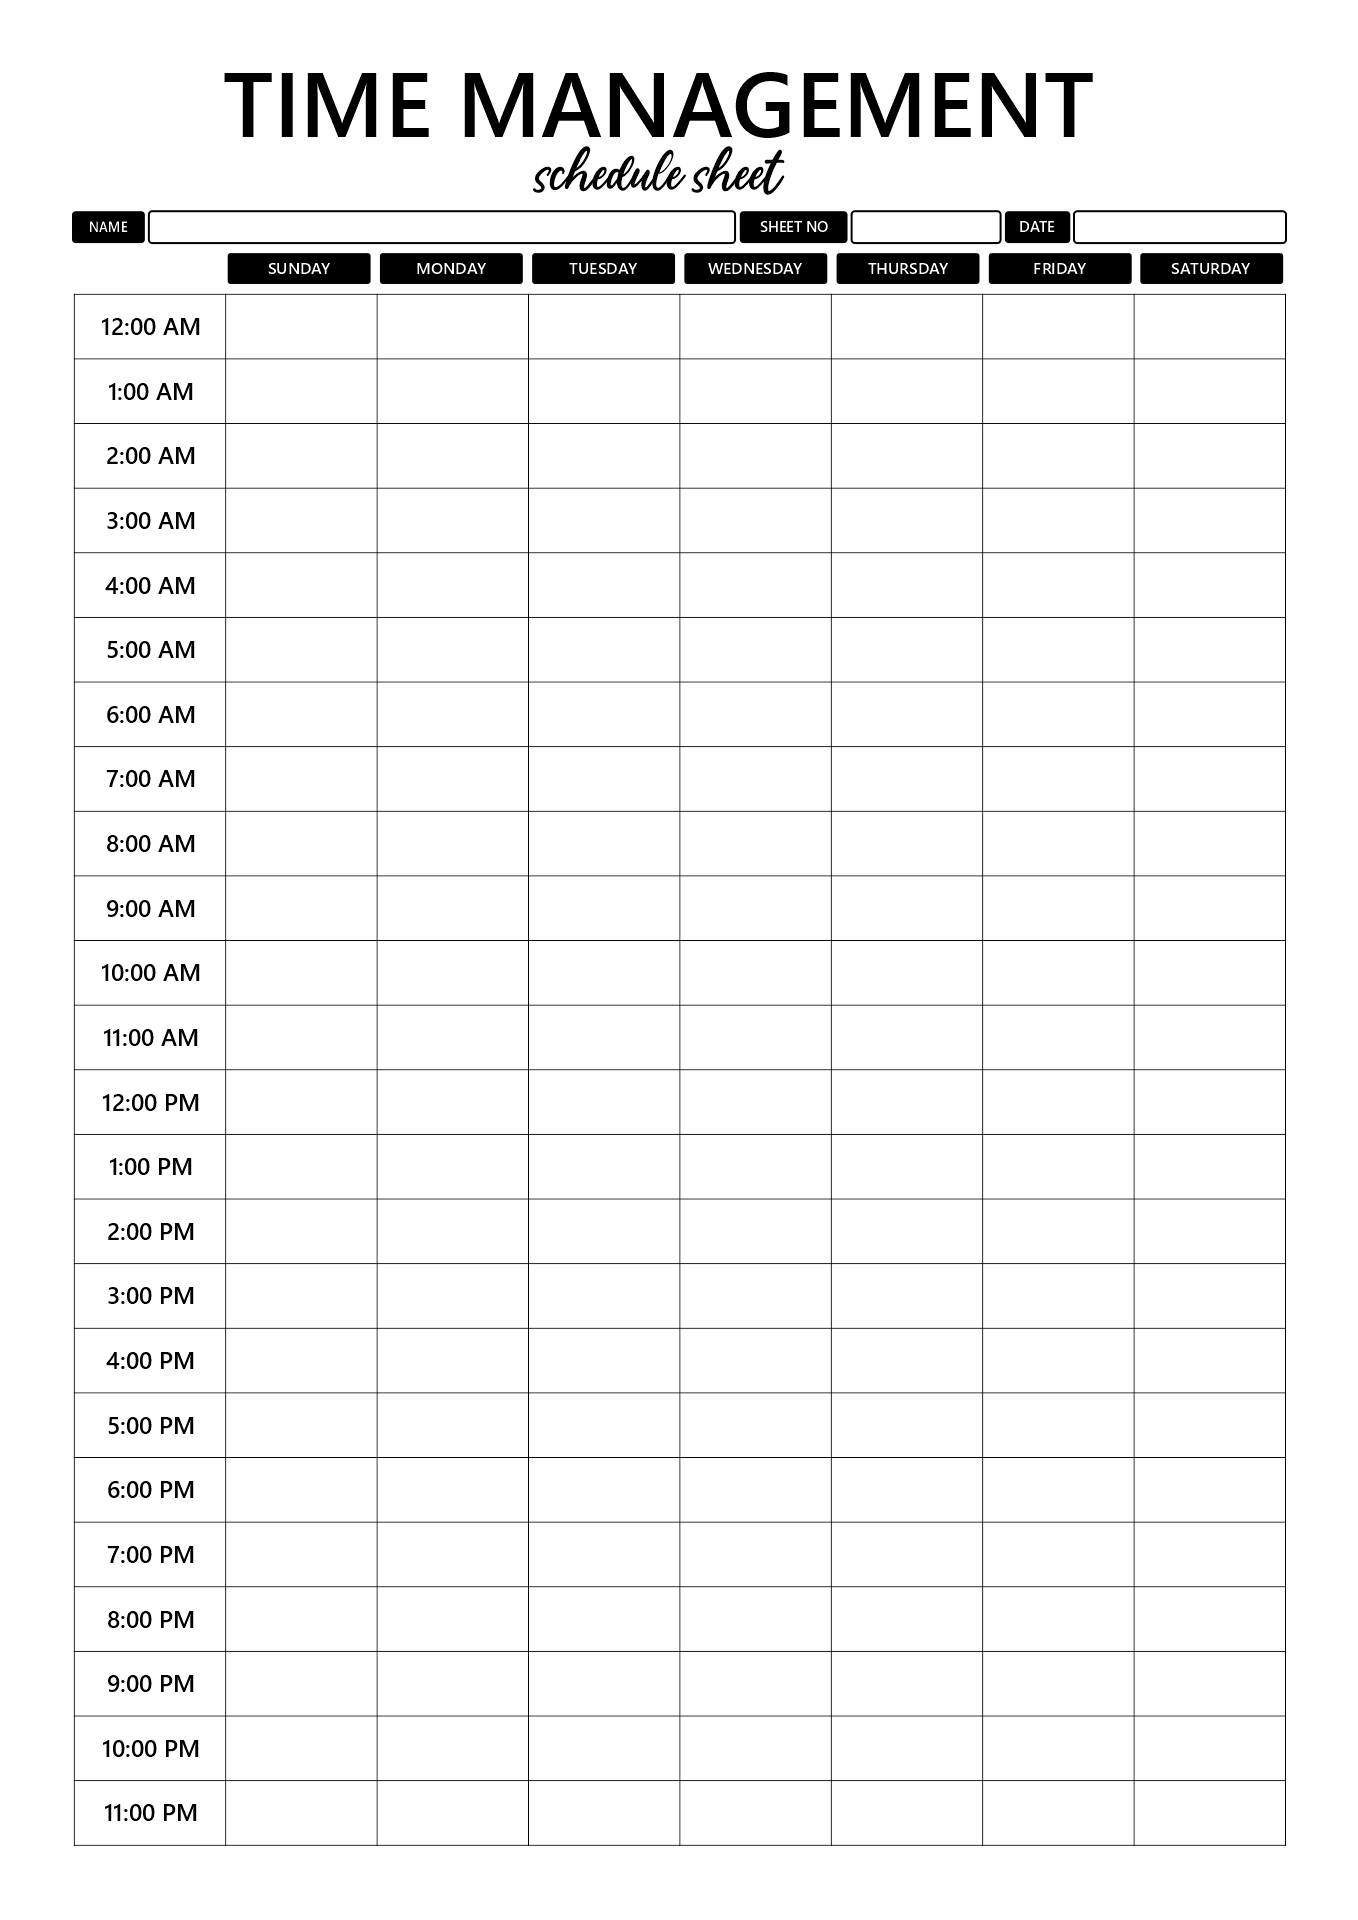 Time Management Schedule Template Image